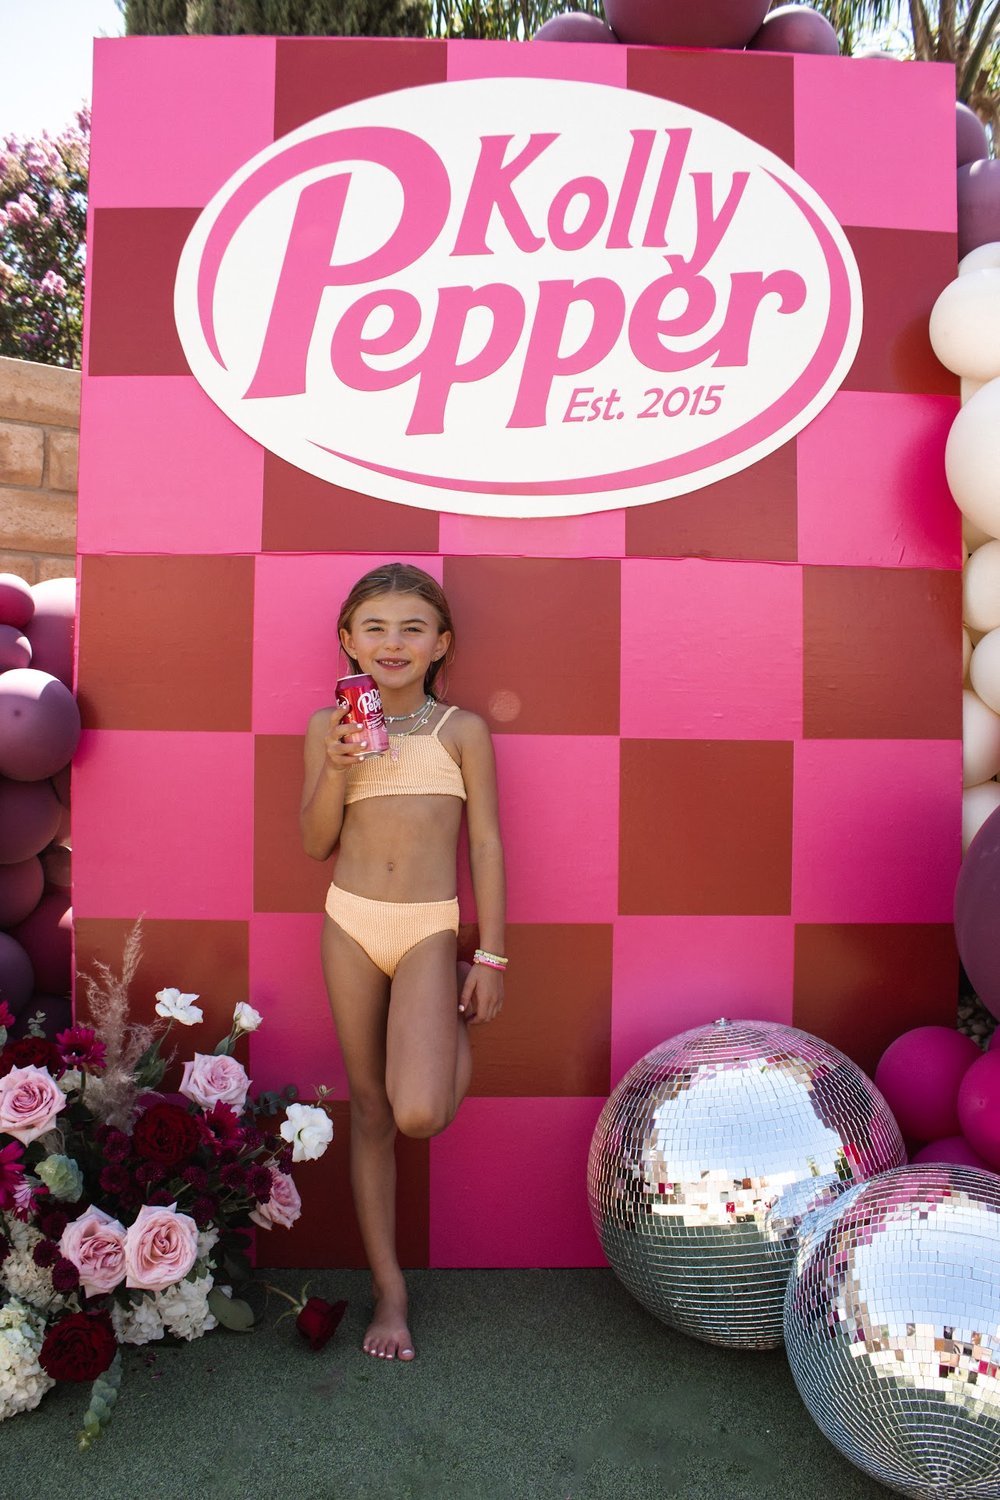 kid wearing a swimwear and holding a can of Kolly Pepper